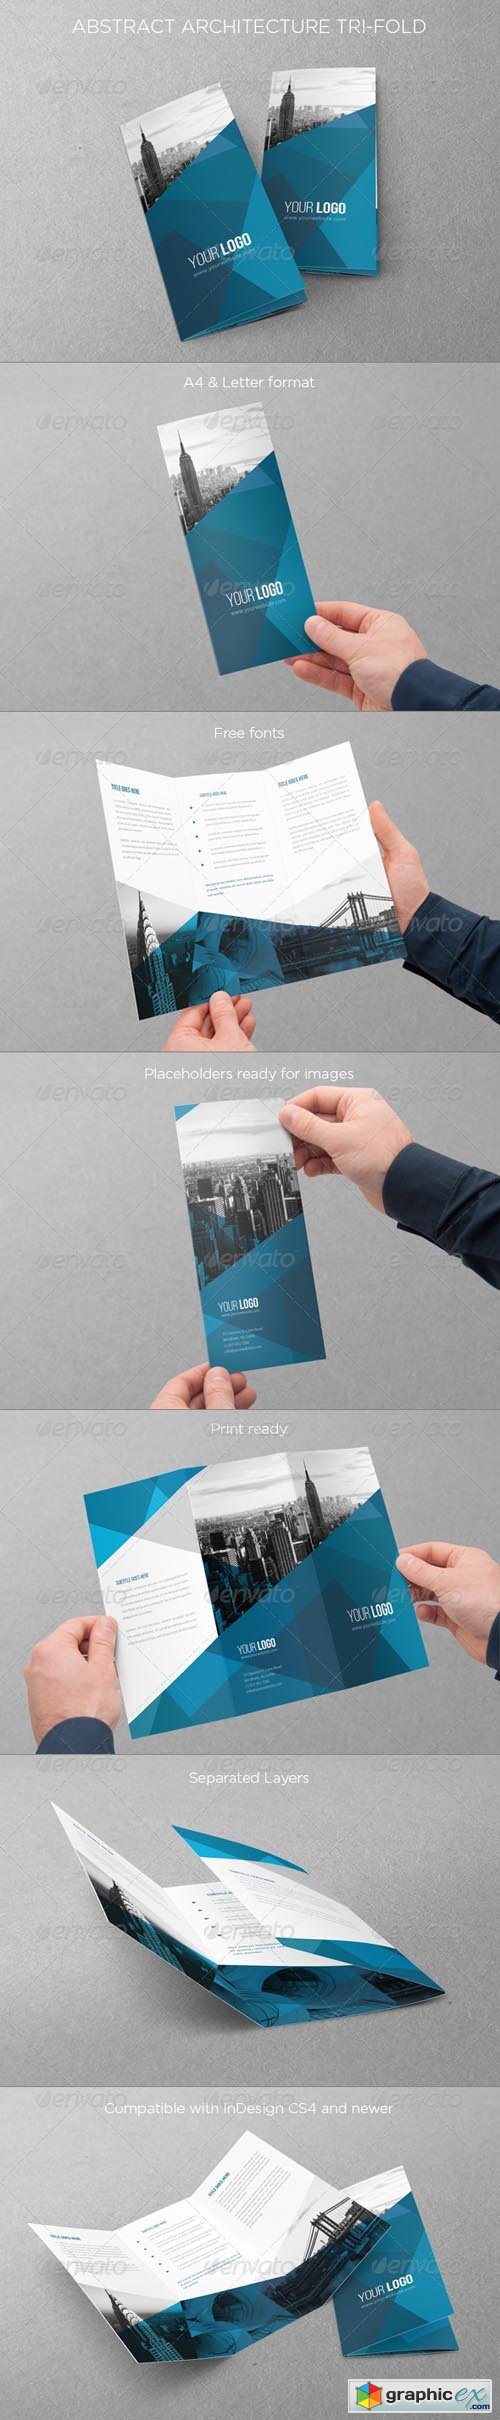 Abstract Architecture Trifold